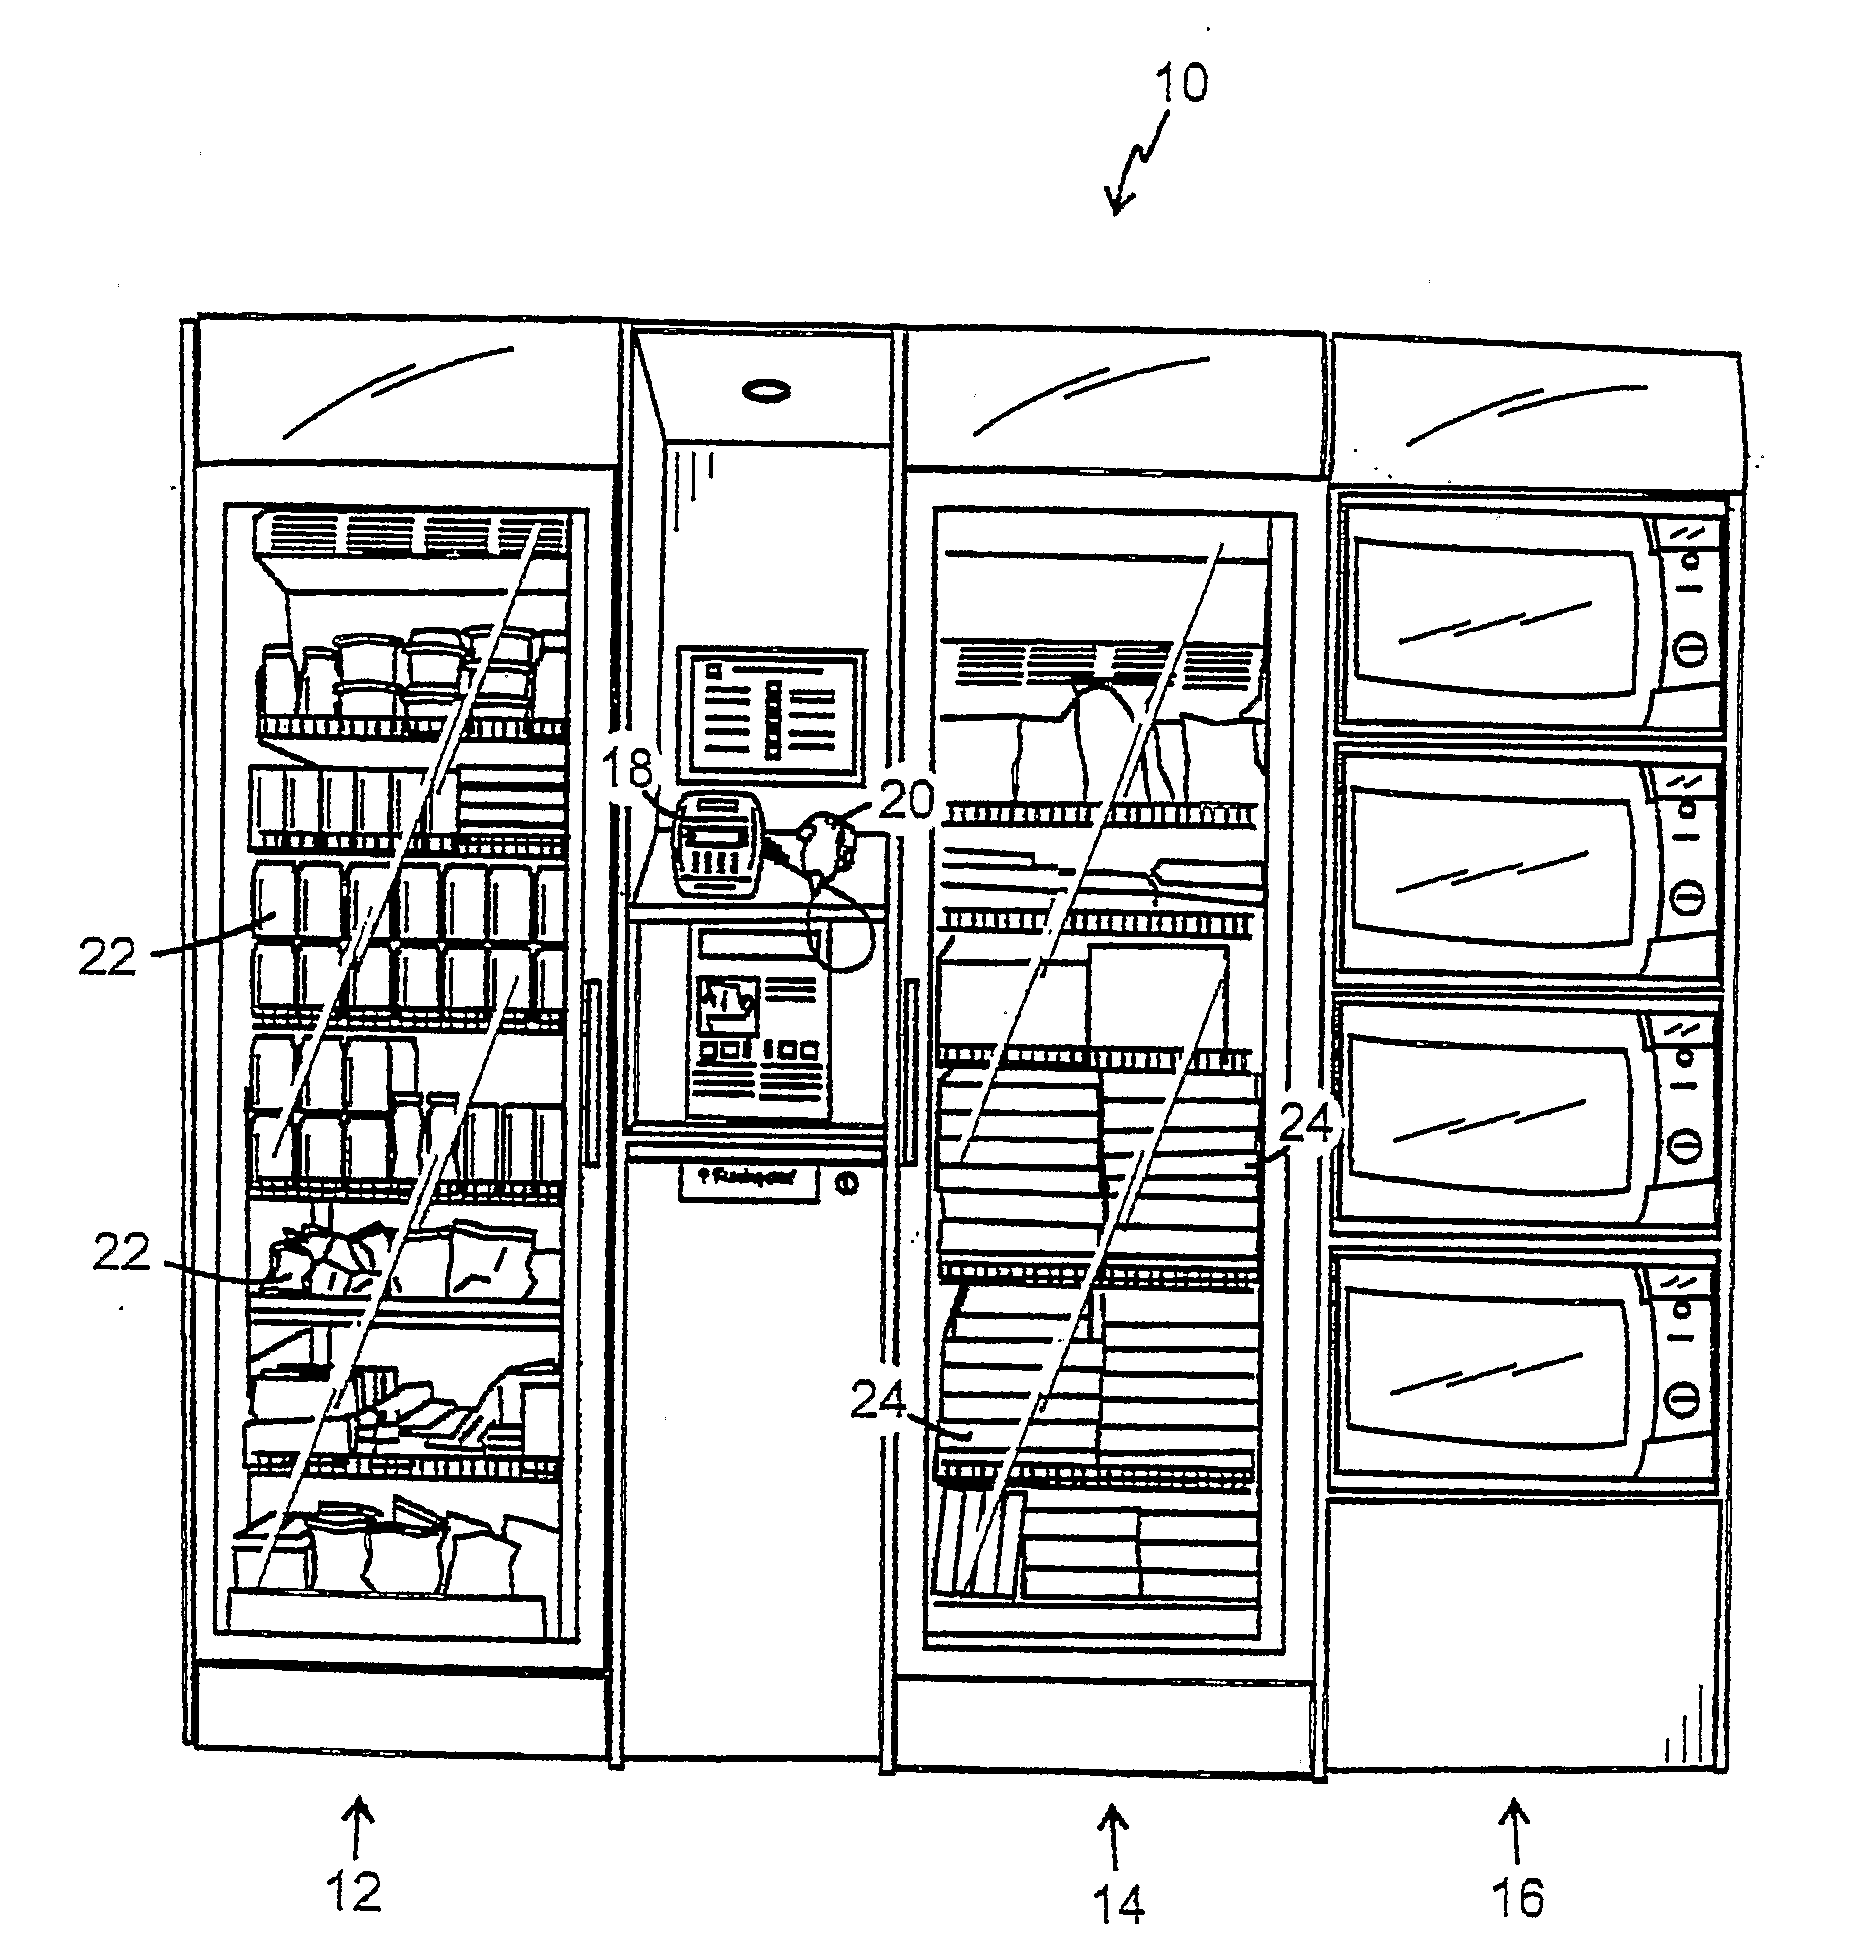 Storage-Cabinet and Method for Selling Frozen and/or Refrigerated Goods From Such a Locked Storage-Cabinet